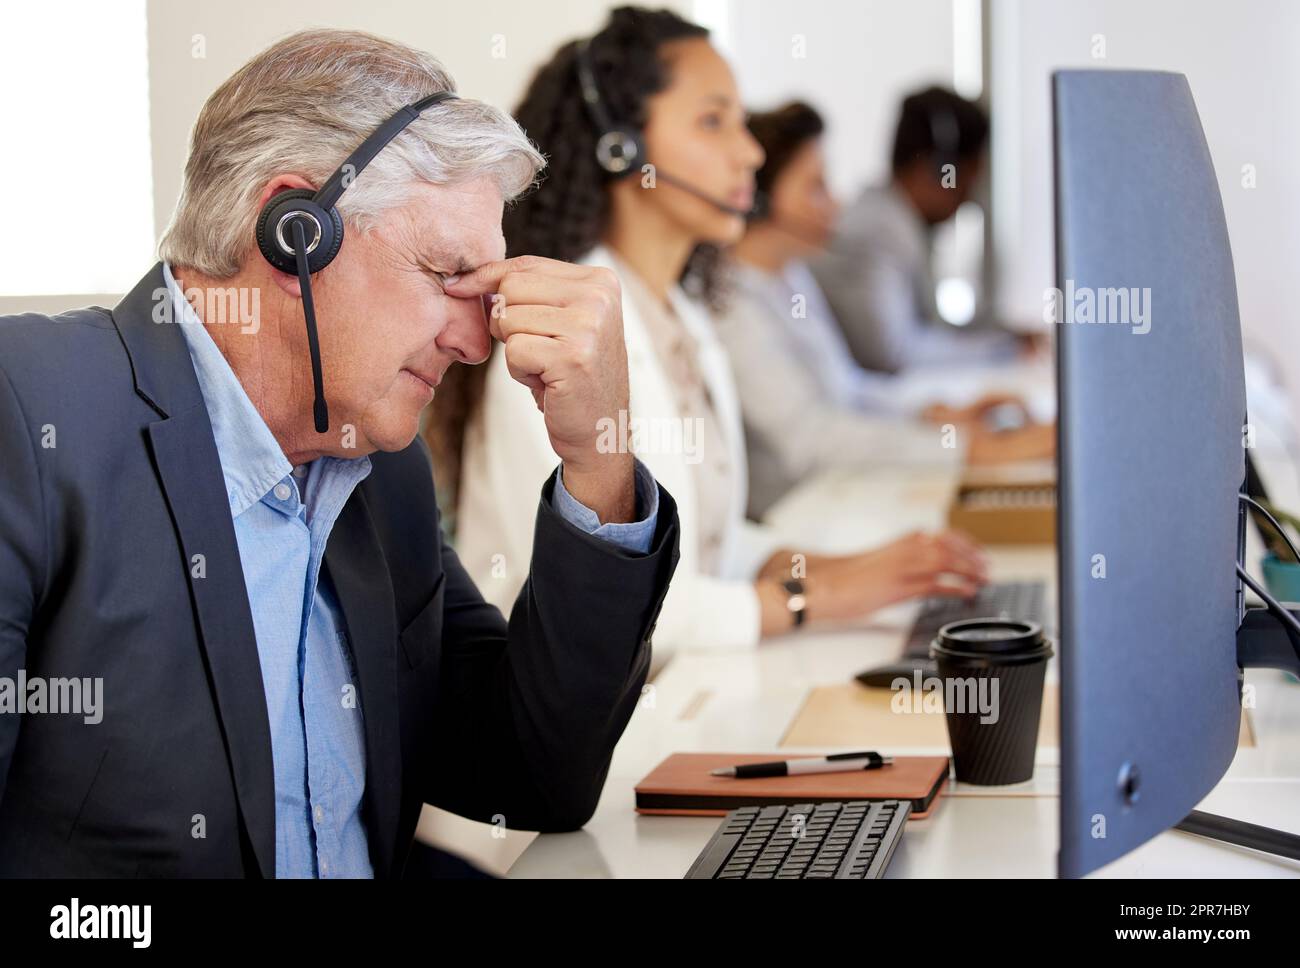 The solution is nowhere in sight. a mature call centre agent looking stressed out while working in an office with his colleagues in the background. Stock Photo